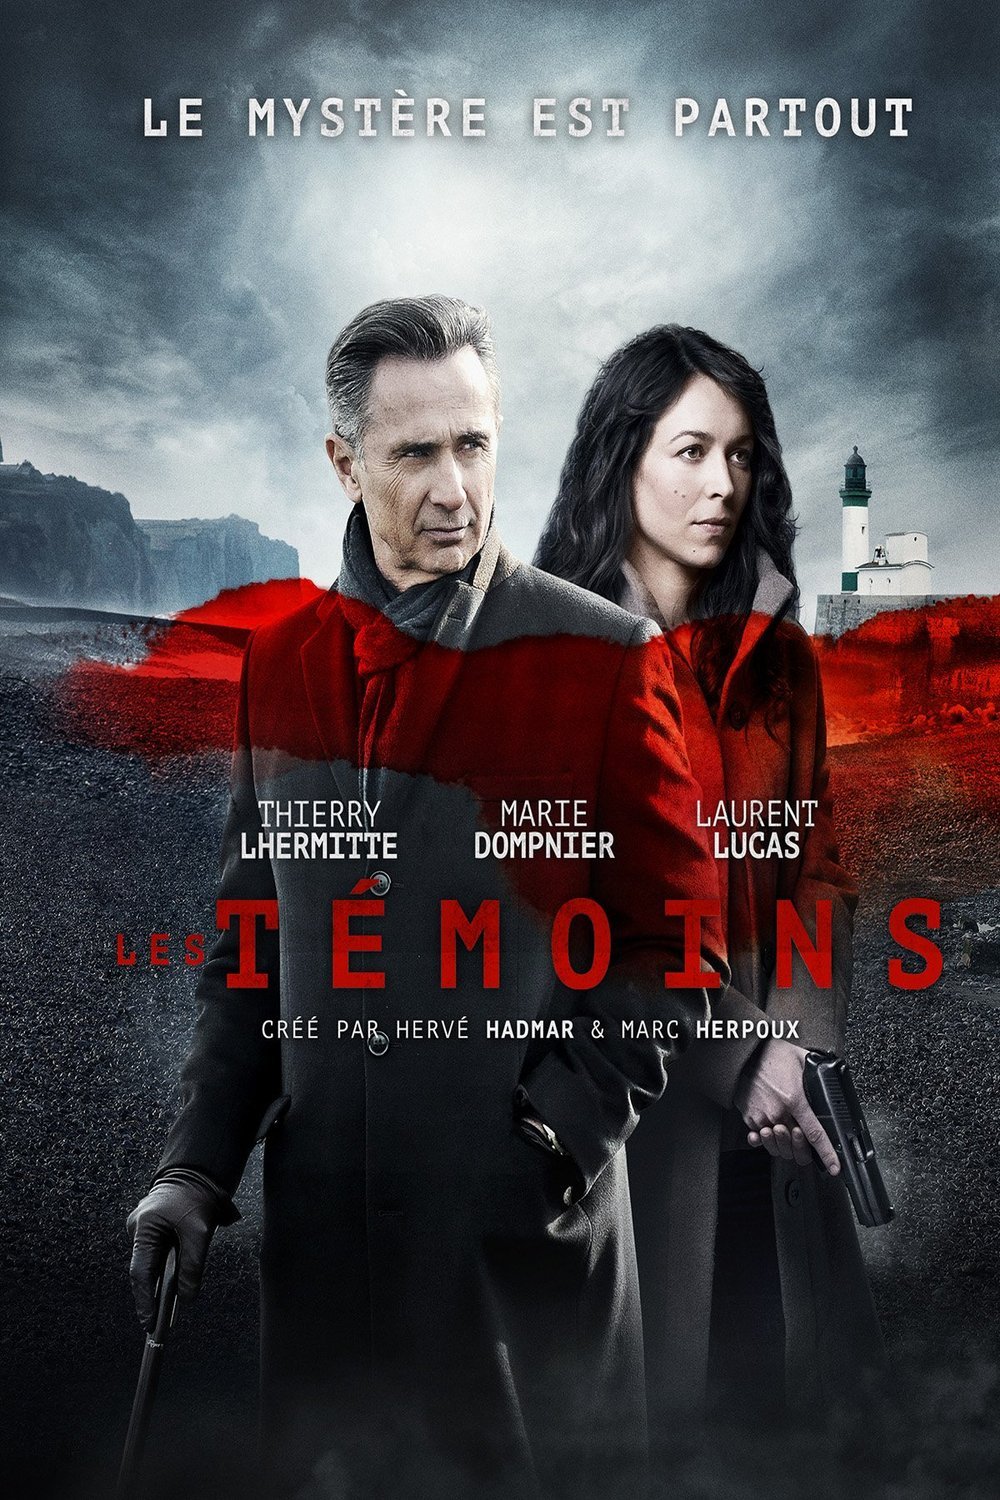 Poster of the movie Les témoins